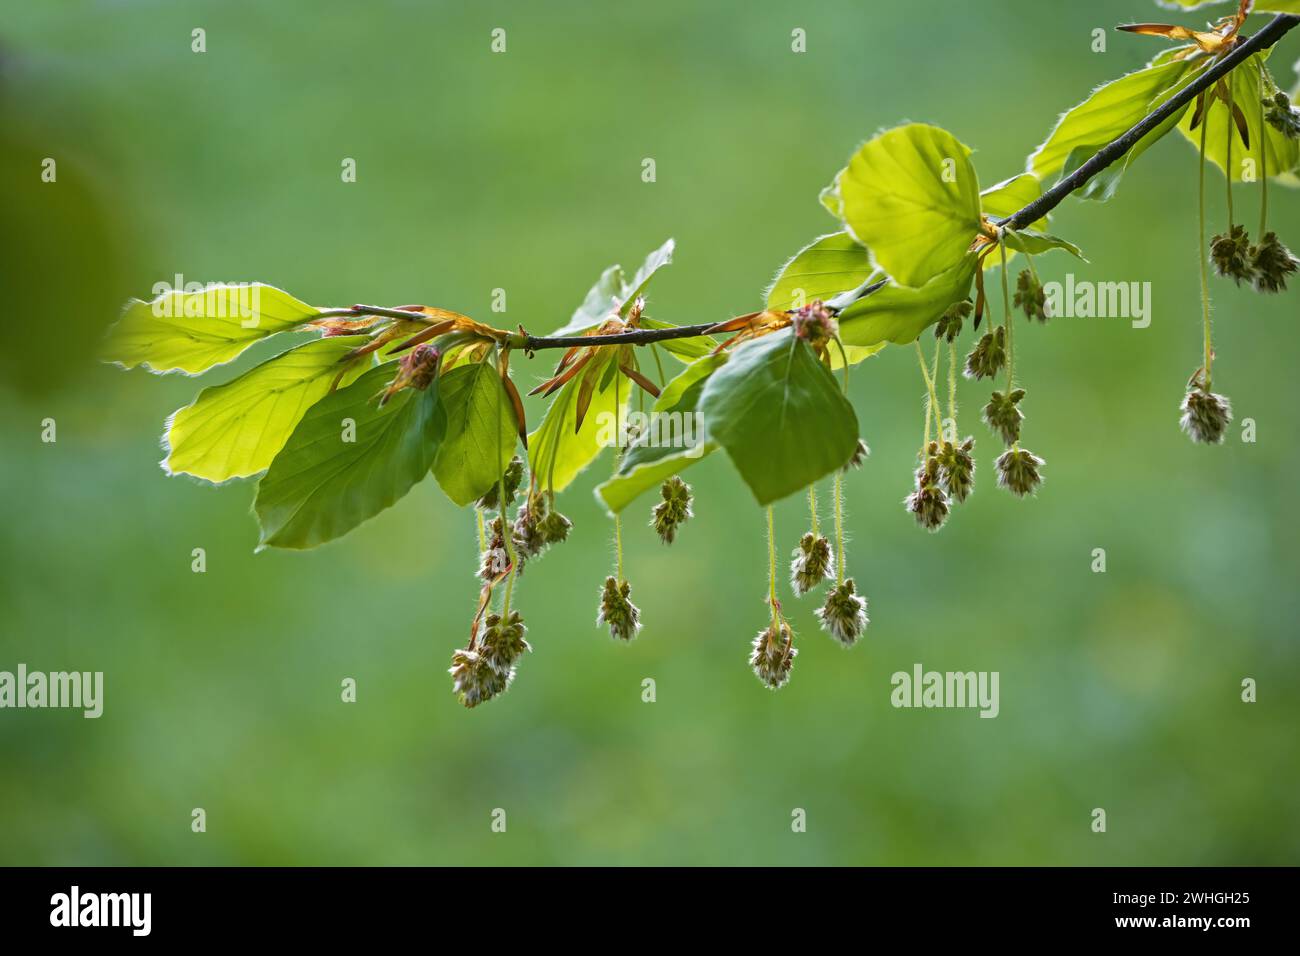 Hanging hairy male flowers and young leaves on a branch of a beech tree (Fagus sylvatica) in spring, natural green background, c Stock Photo